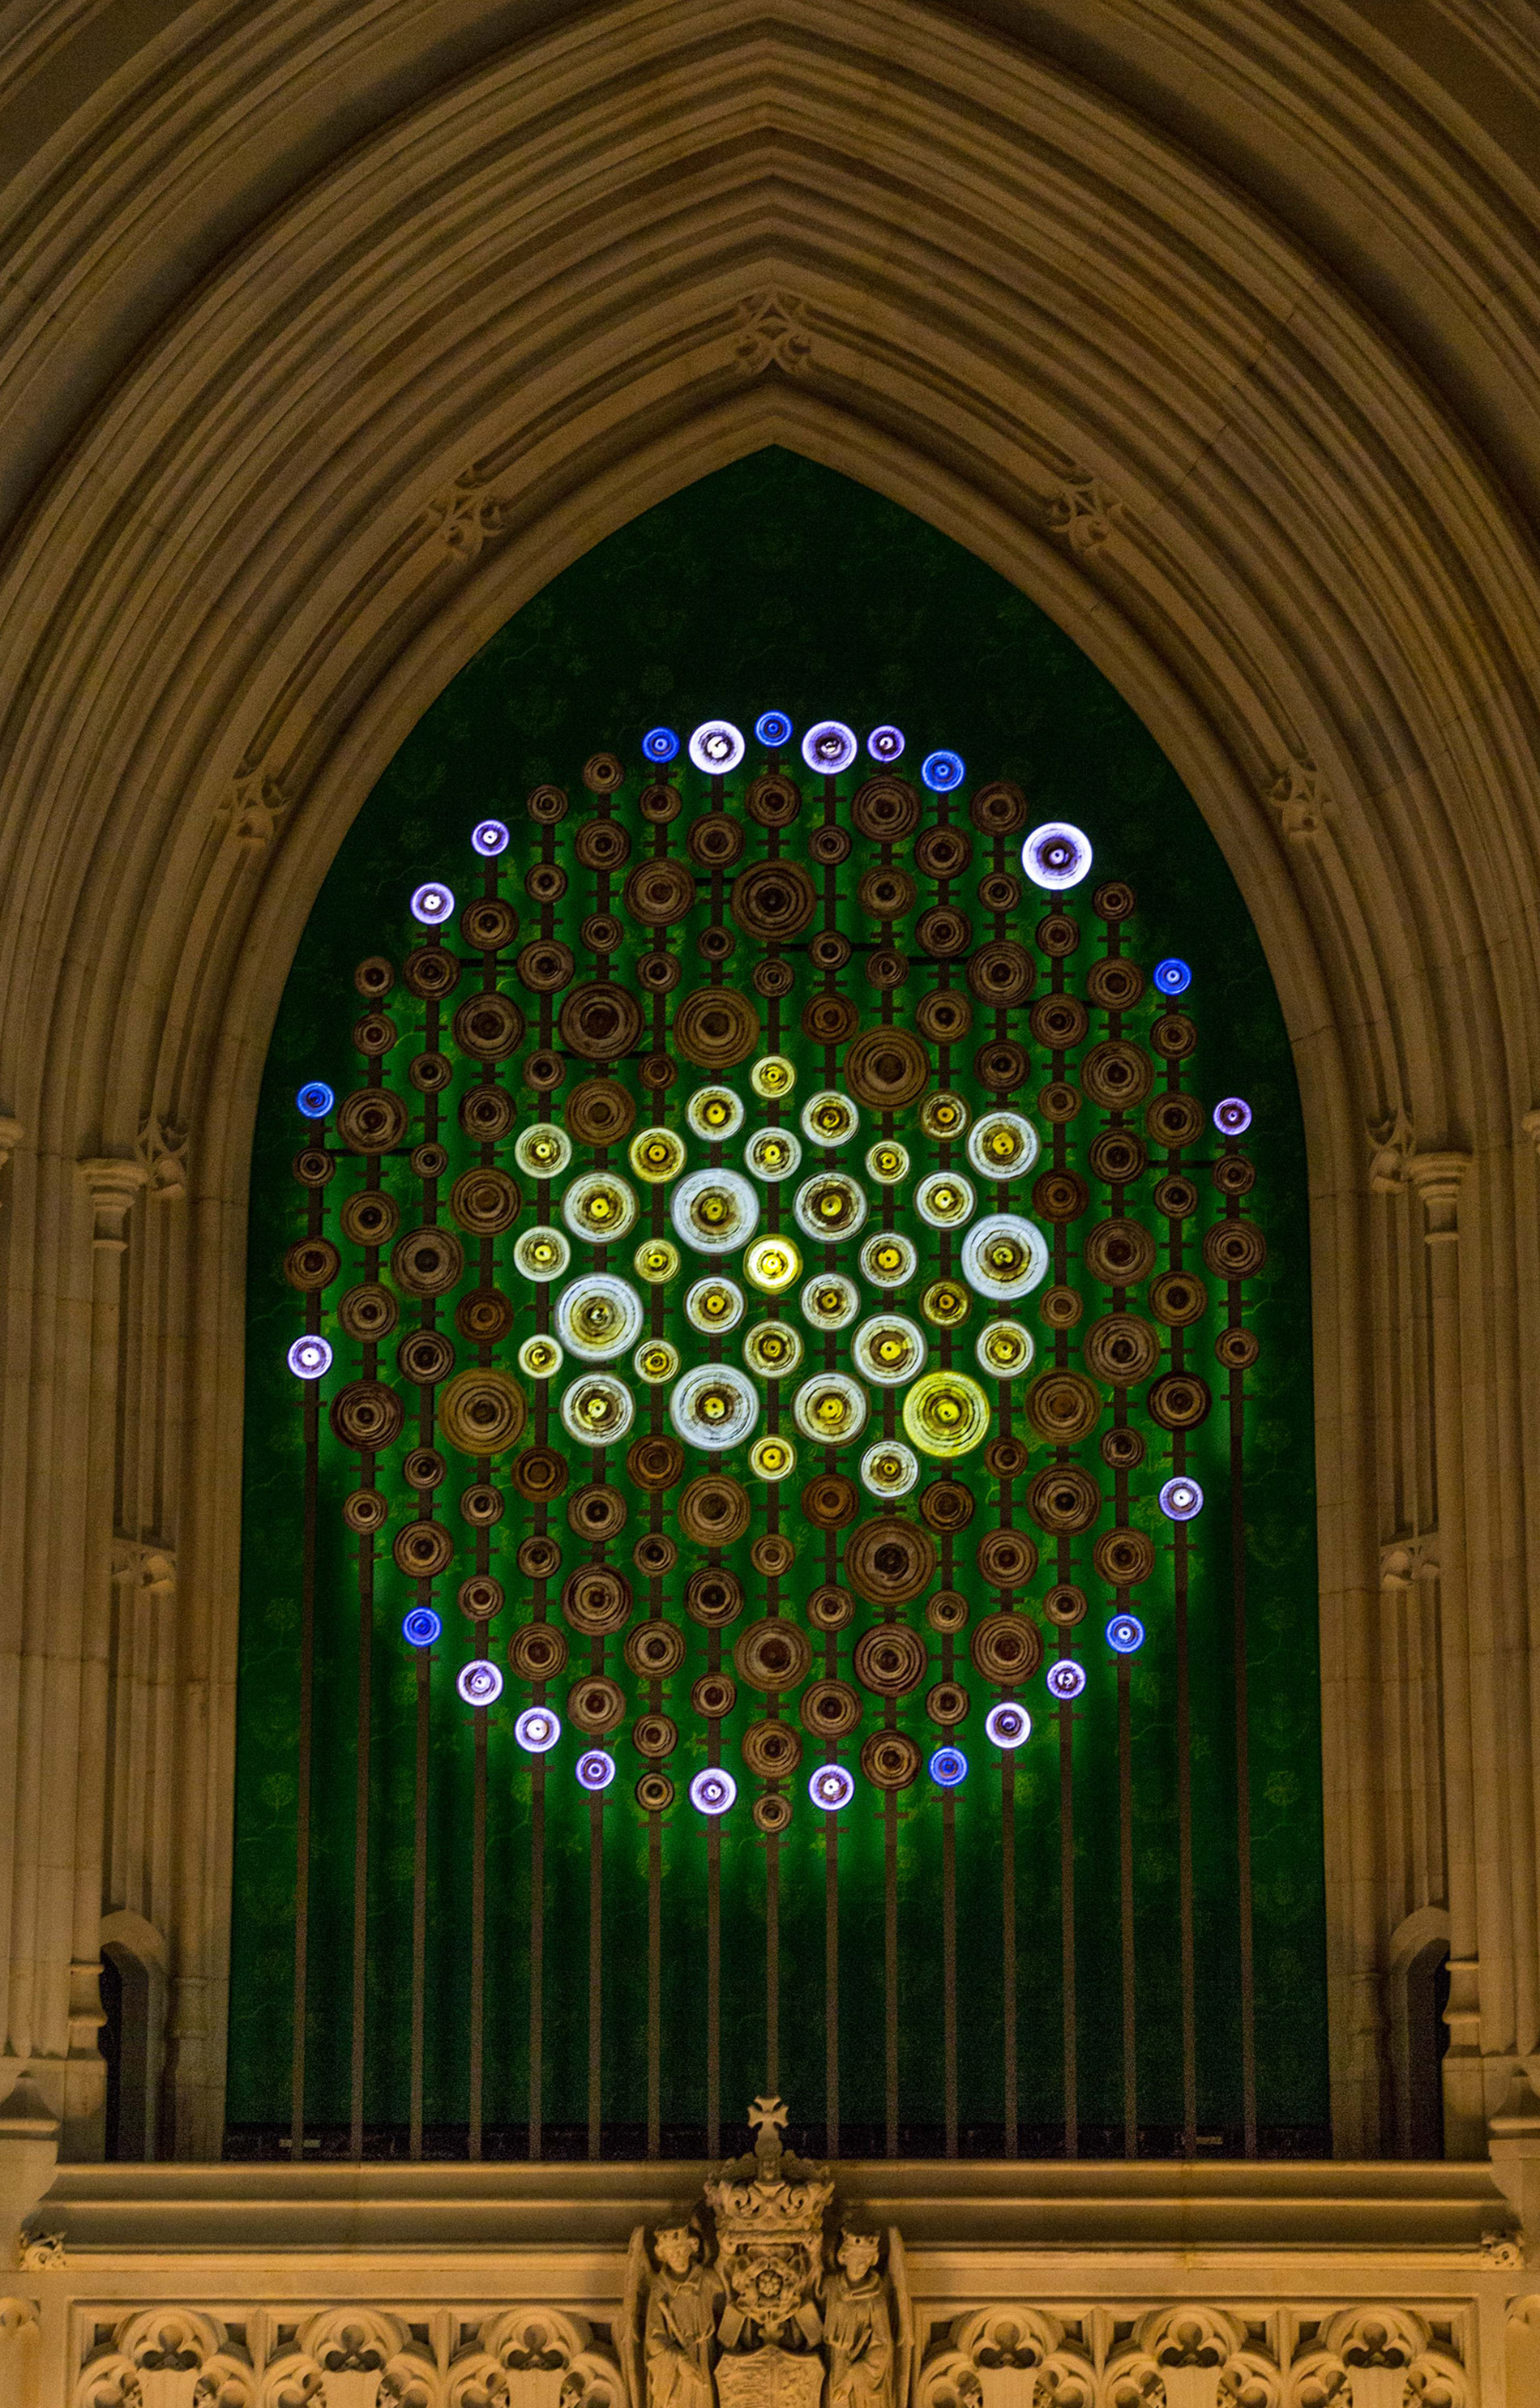  New Dawn, a contemporary sculptural light installation celebrating Women's Suffrage in the Houses of Parliament, London by Mary Branson. 